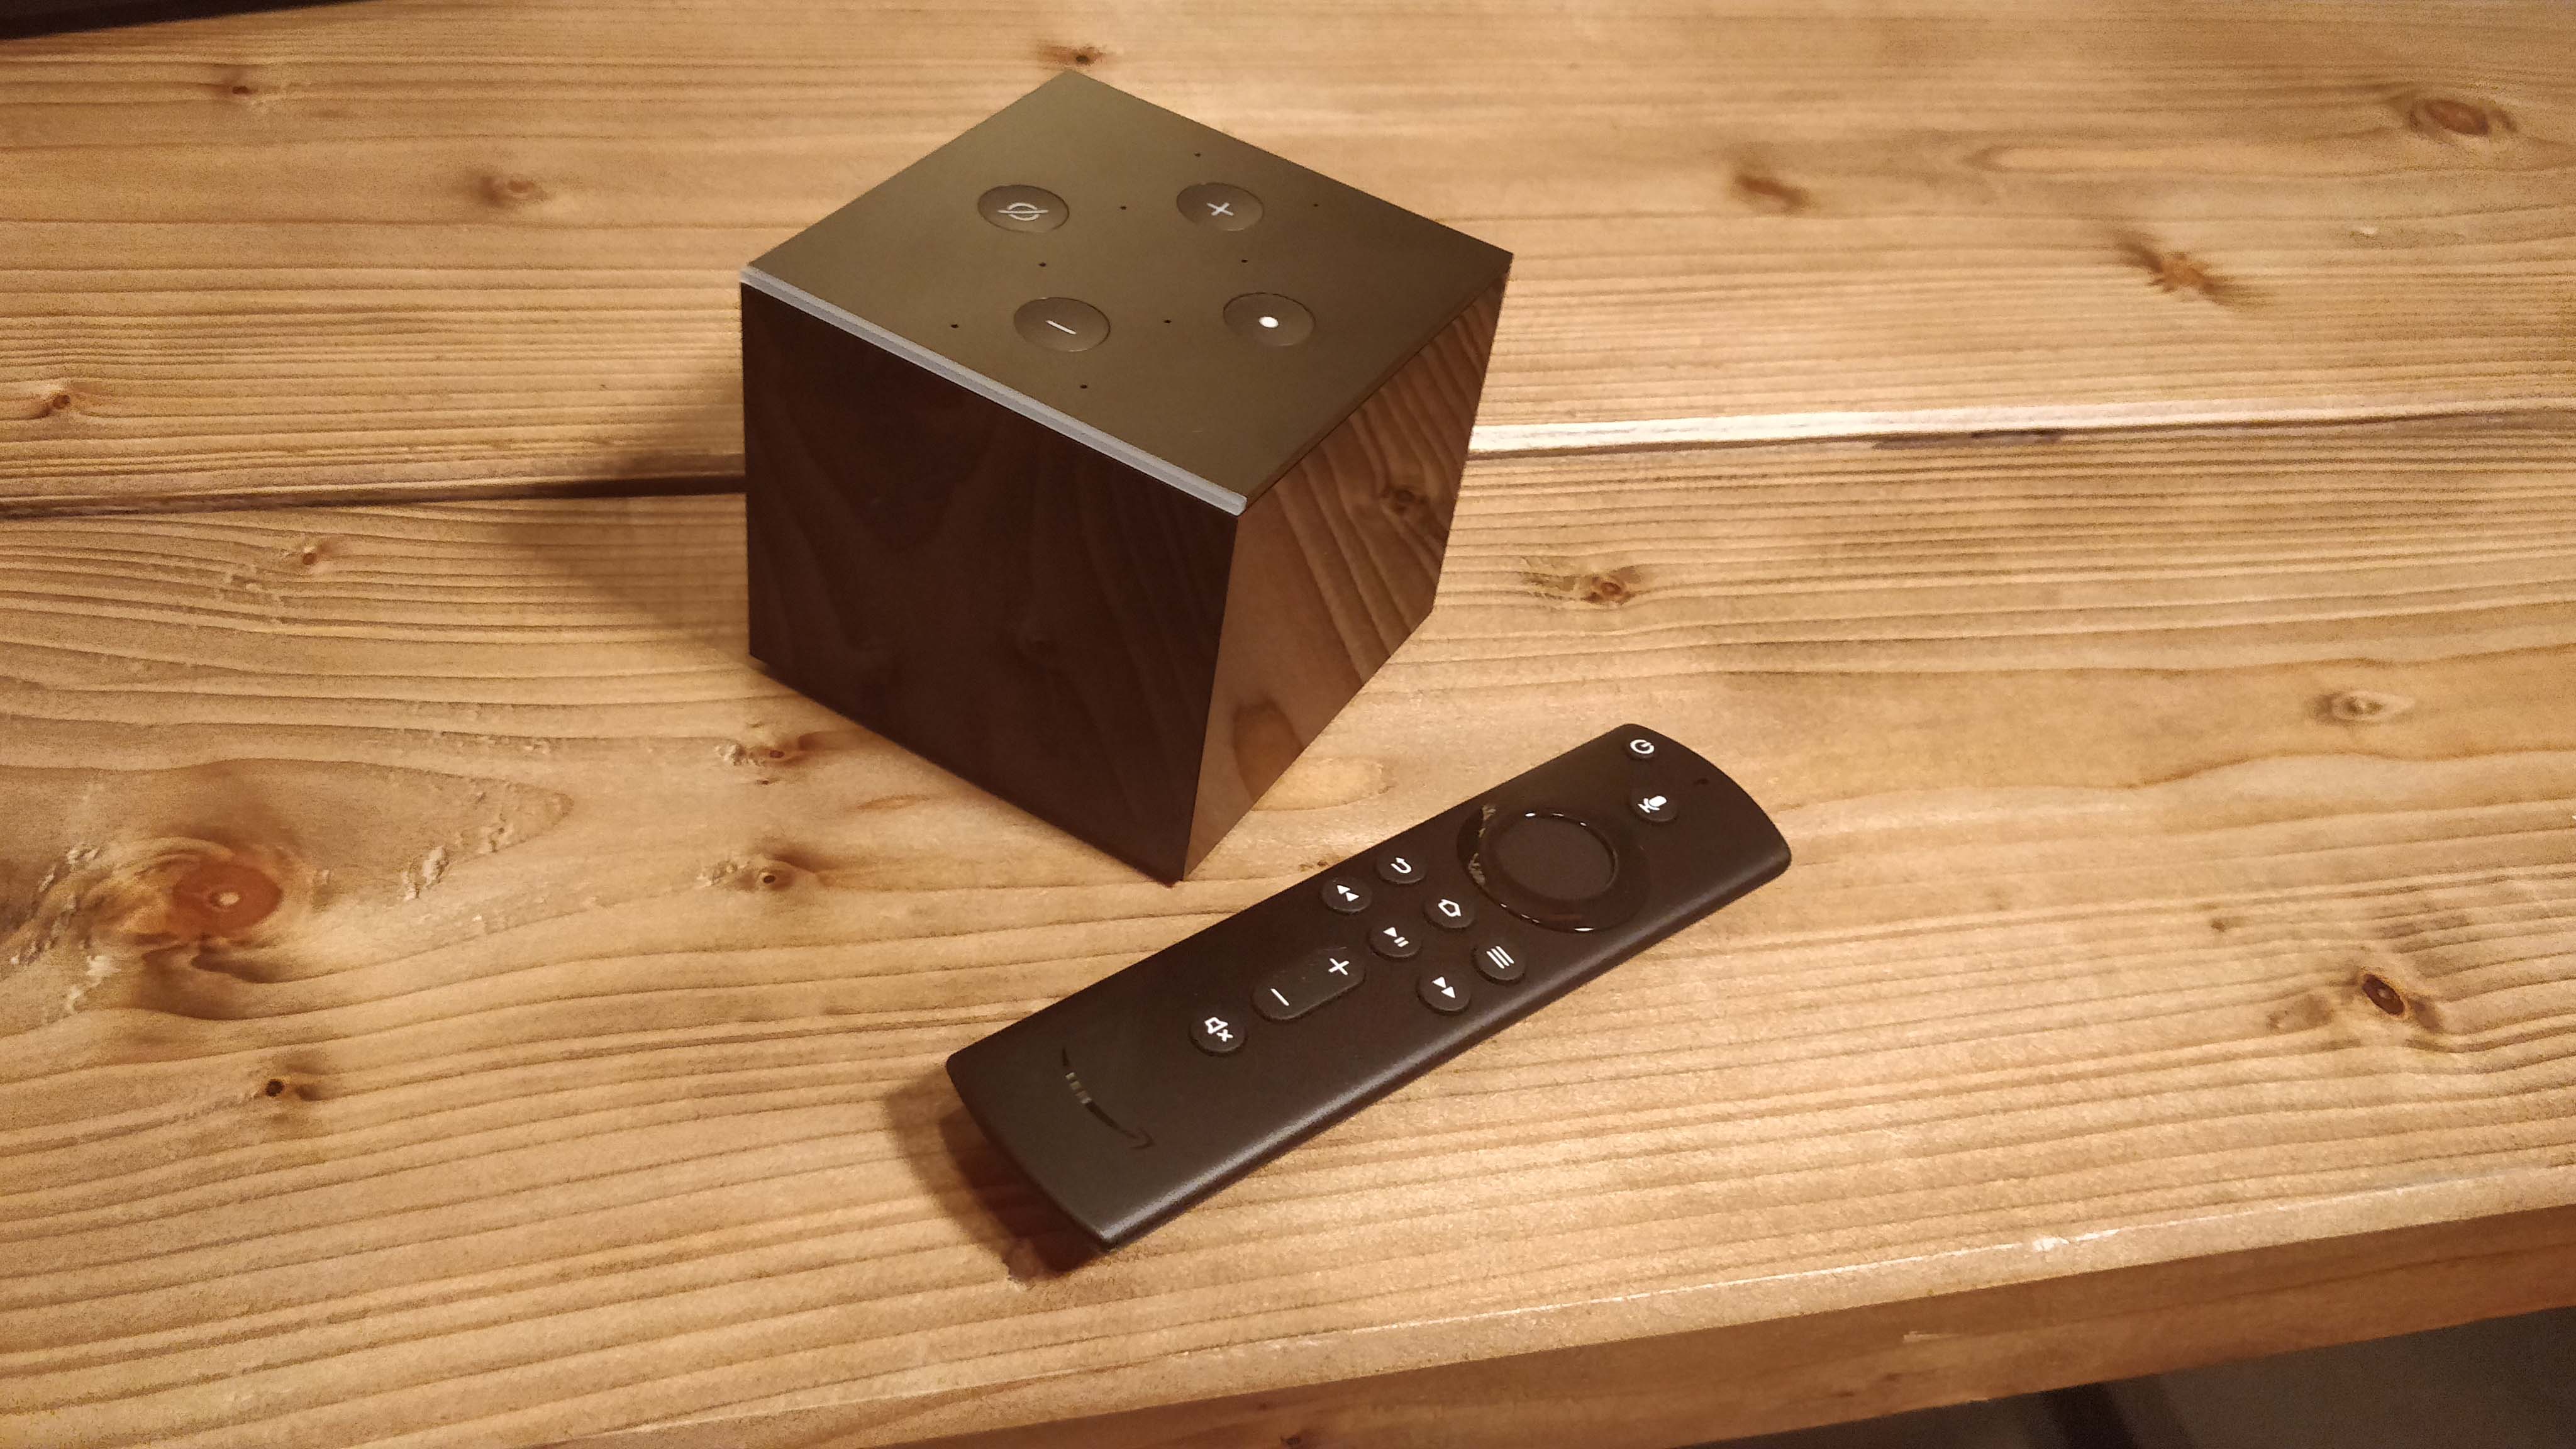 Fire TV Cube (2nd Generation) review: great streaming